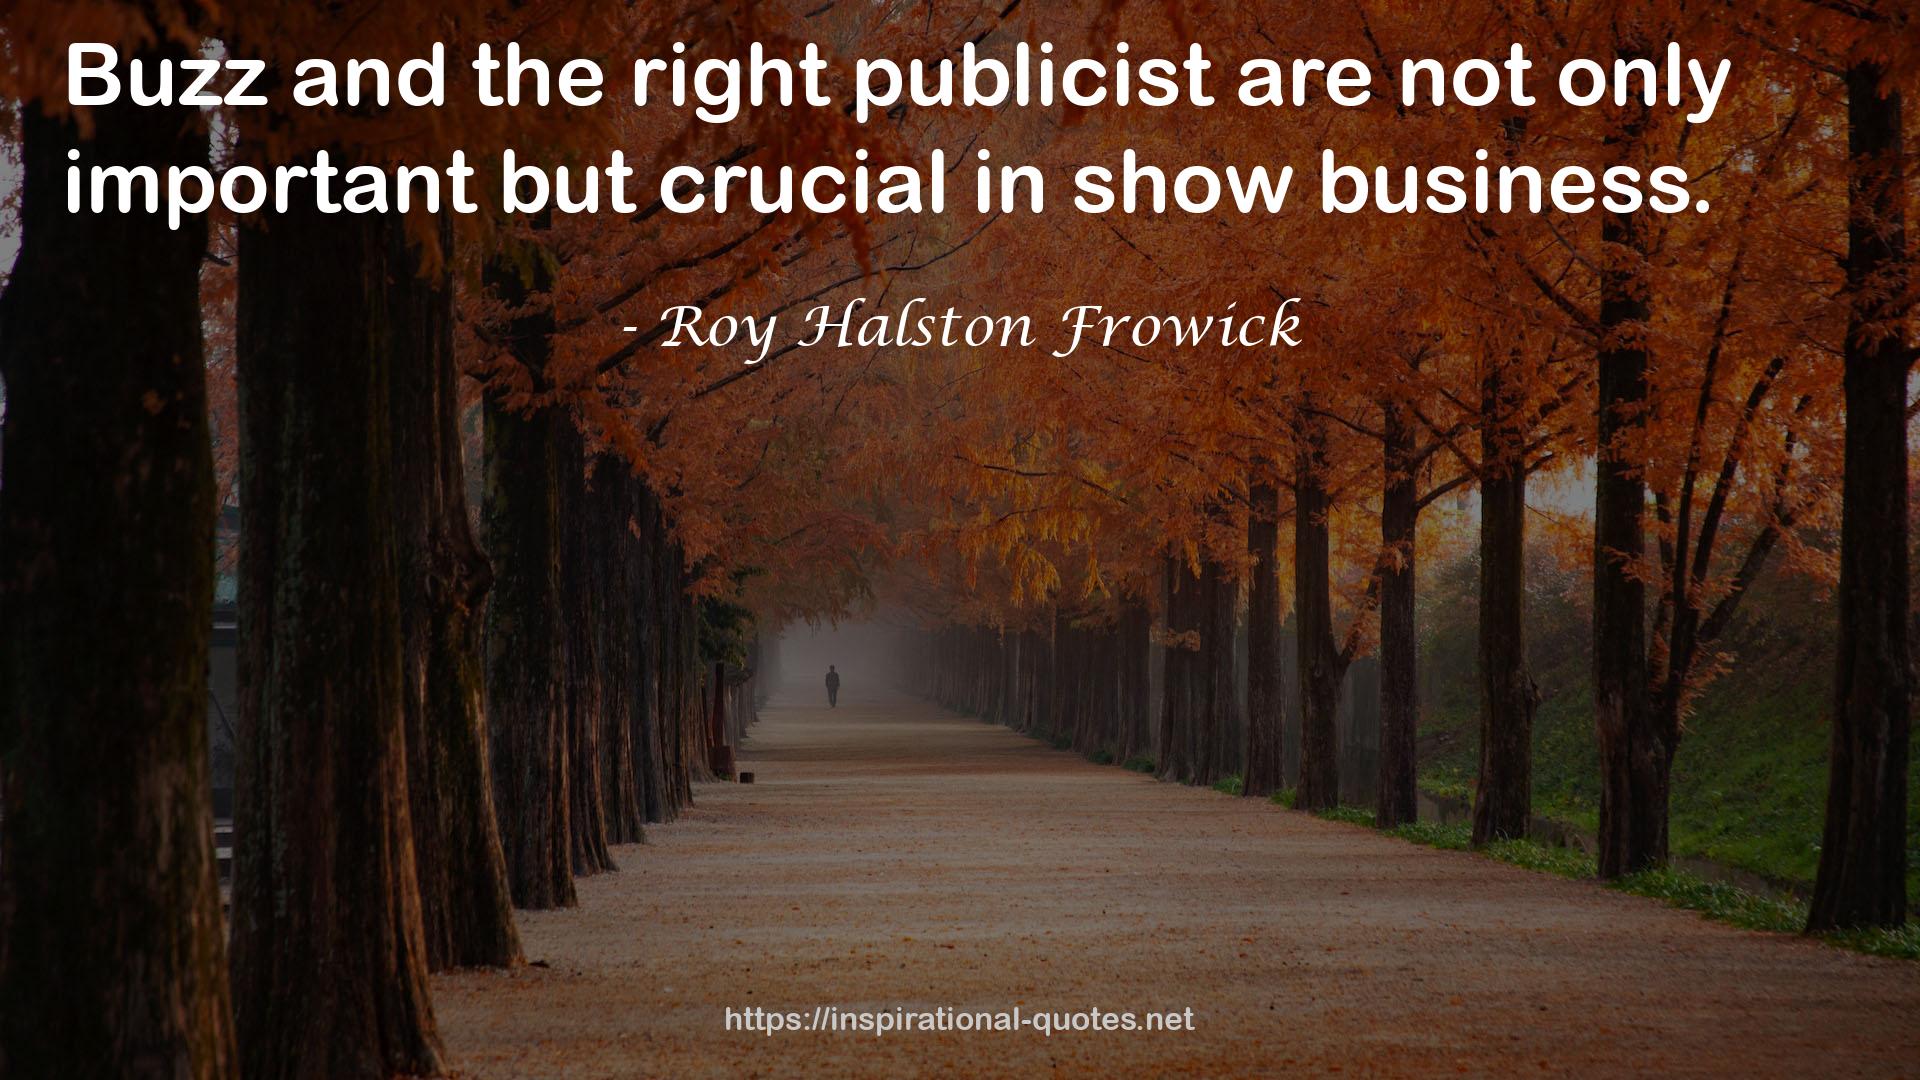 Roy Halston Frowick QUOTES